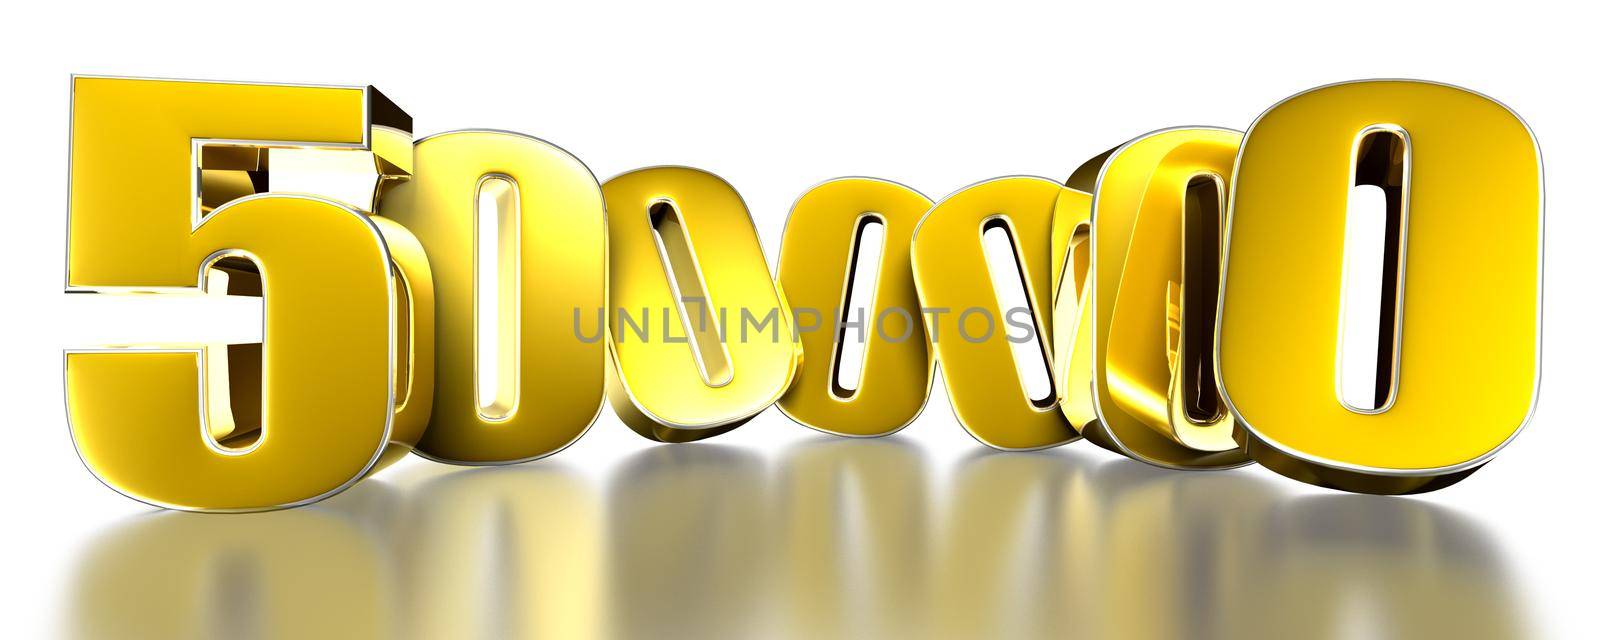 5 000 000 gold 3D illustration on white background with clipping path.